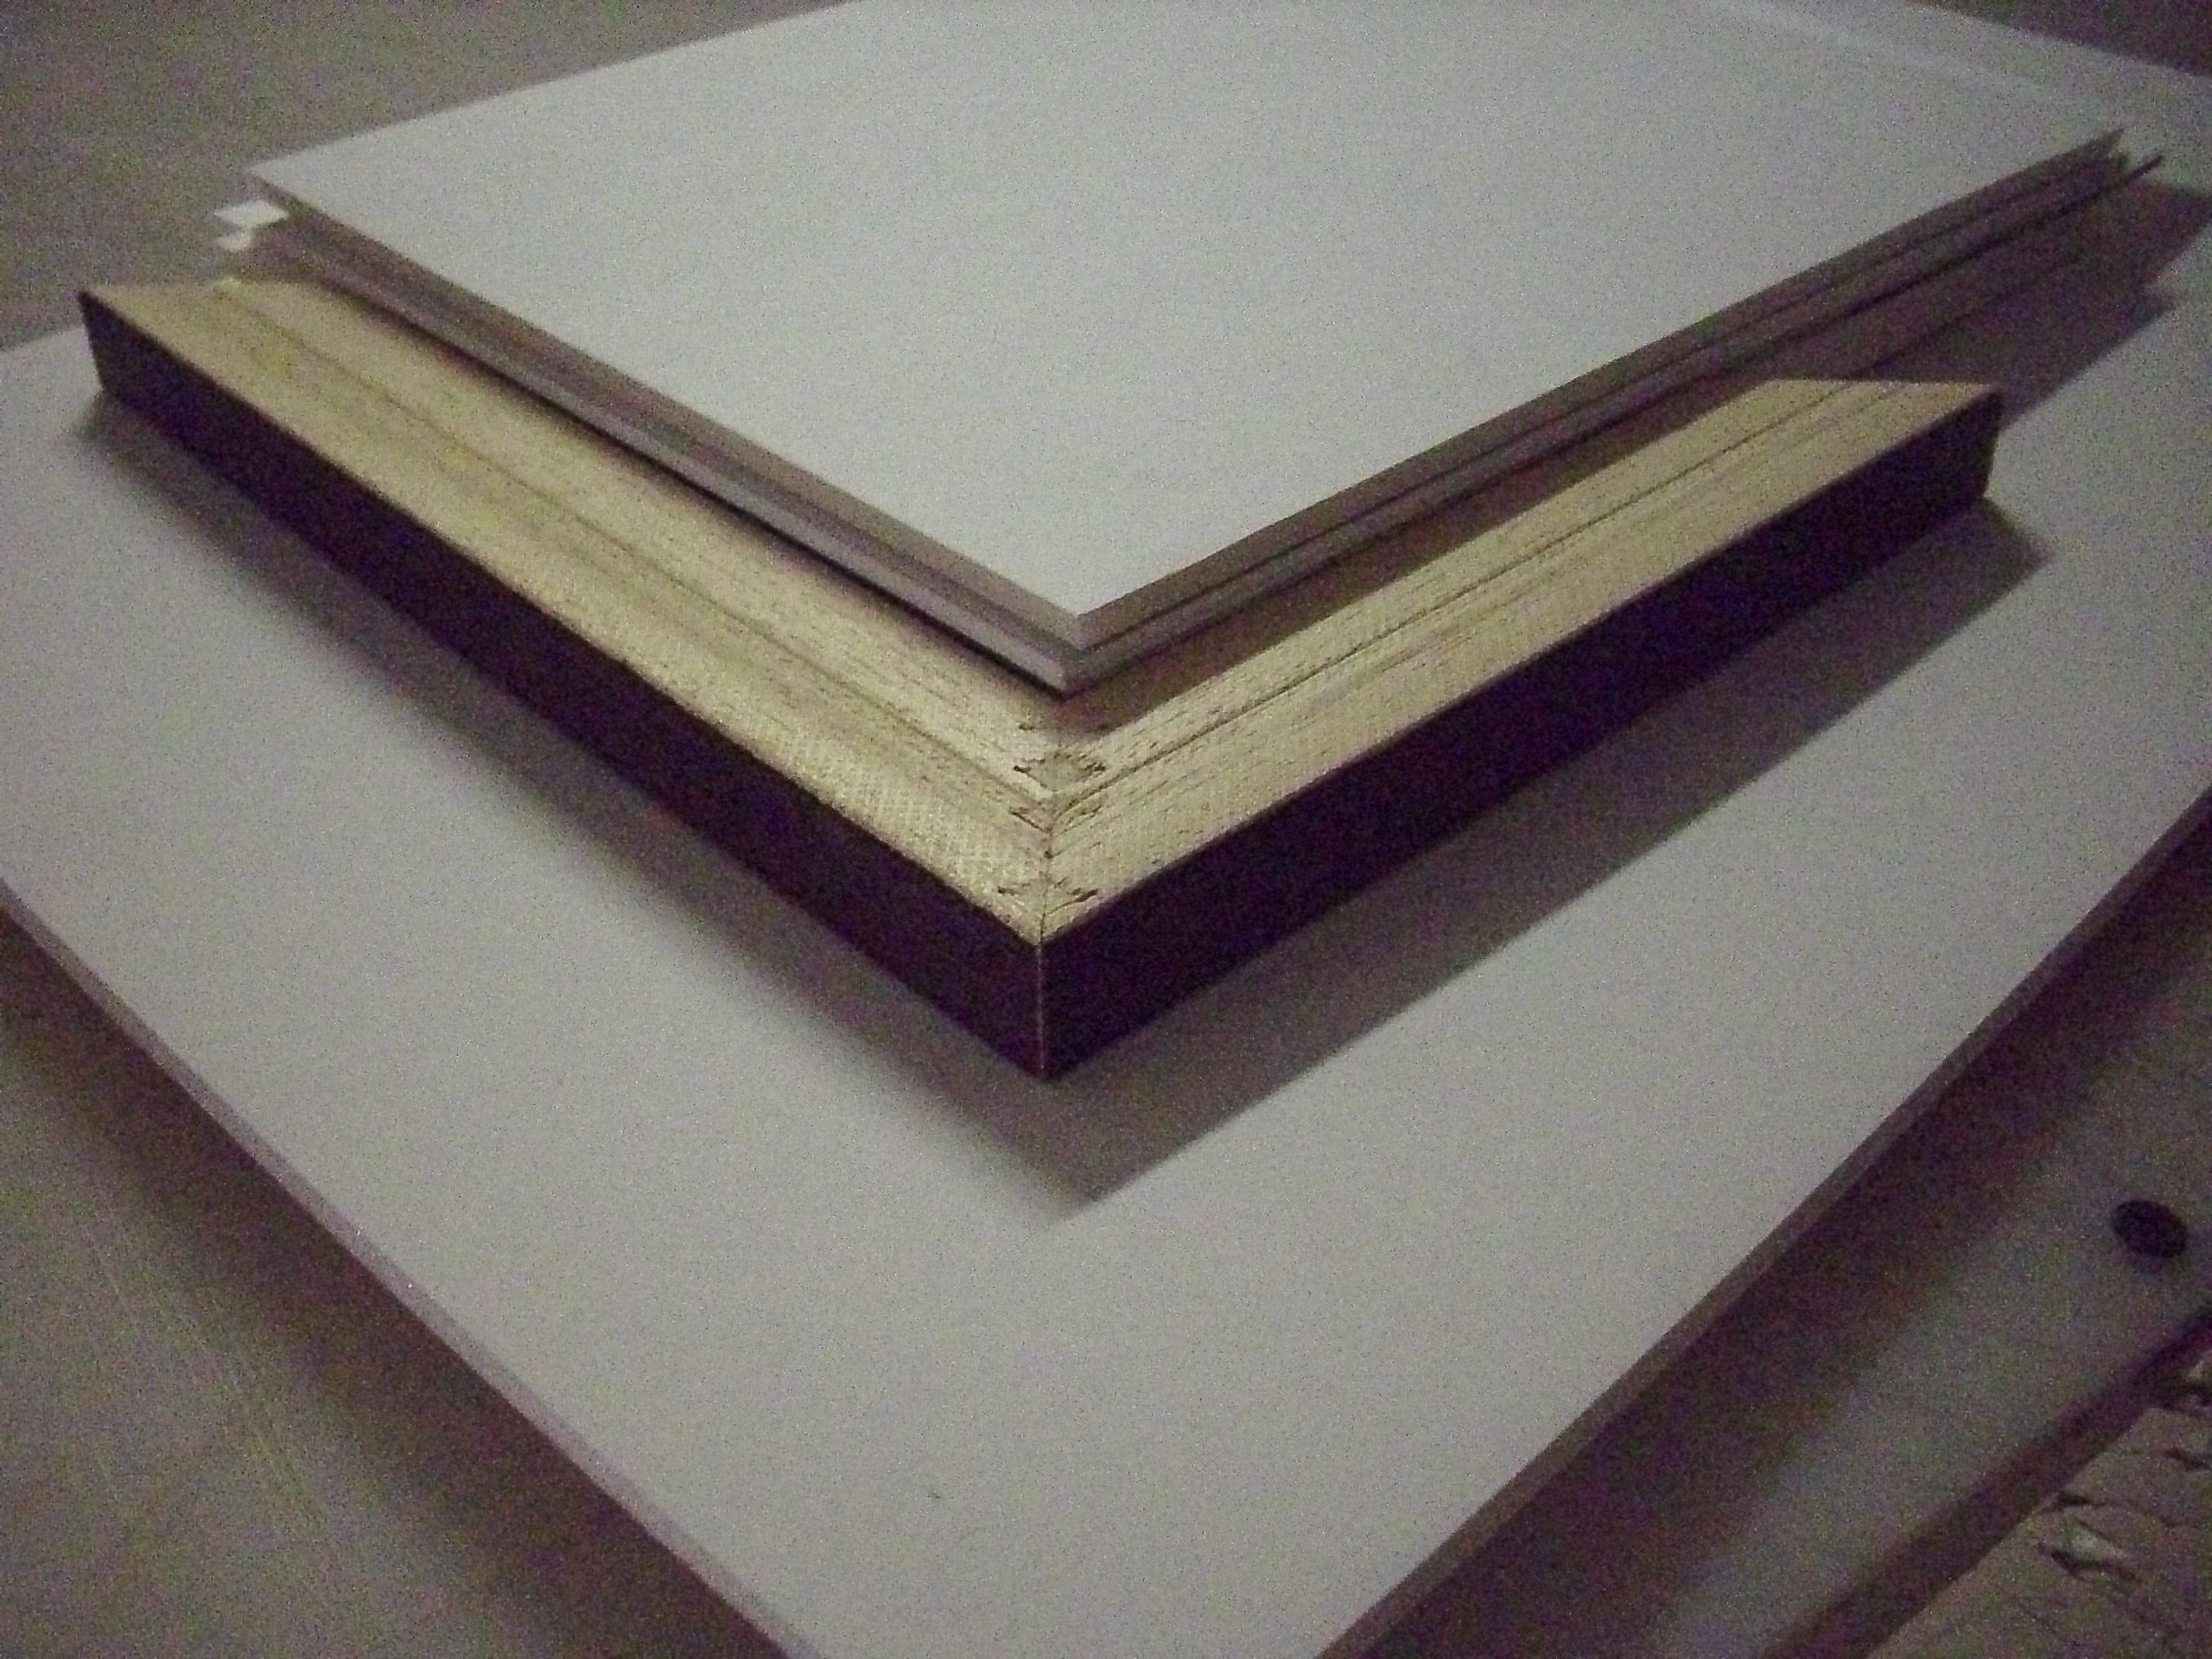 Picture Framing Do's and Don'ts - Essential Tips and Mistakes to Avoid